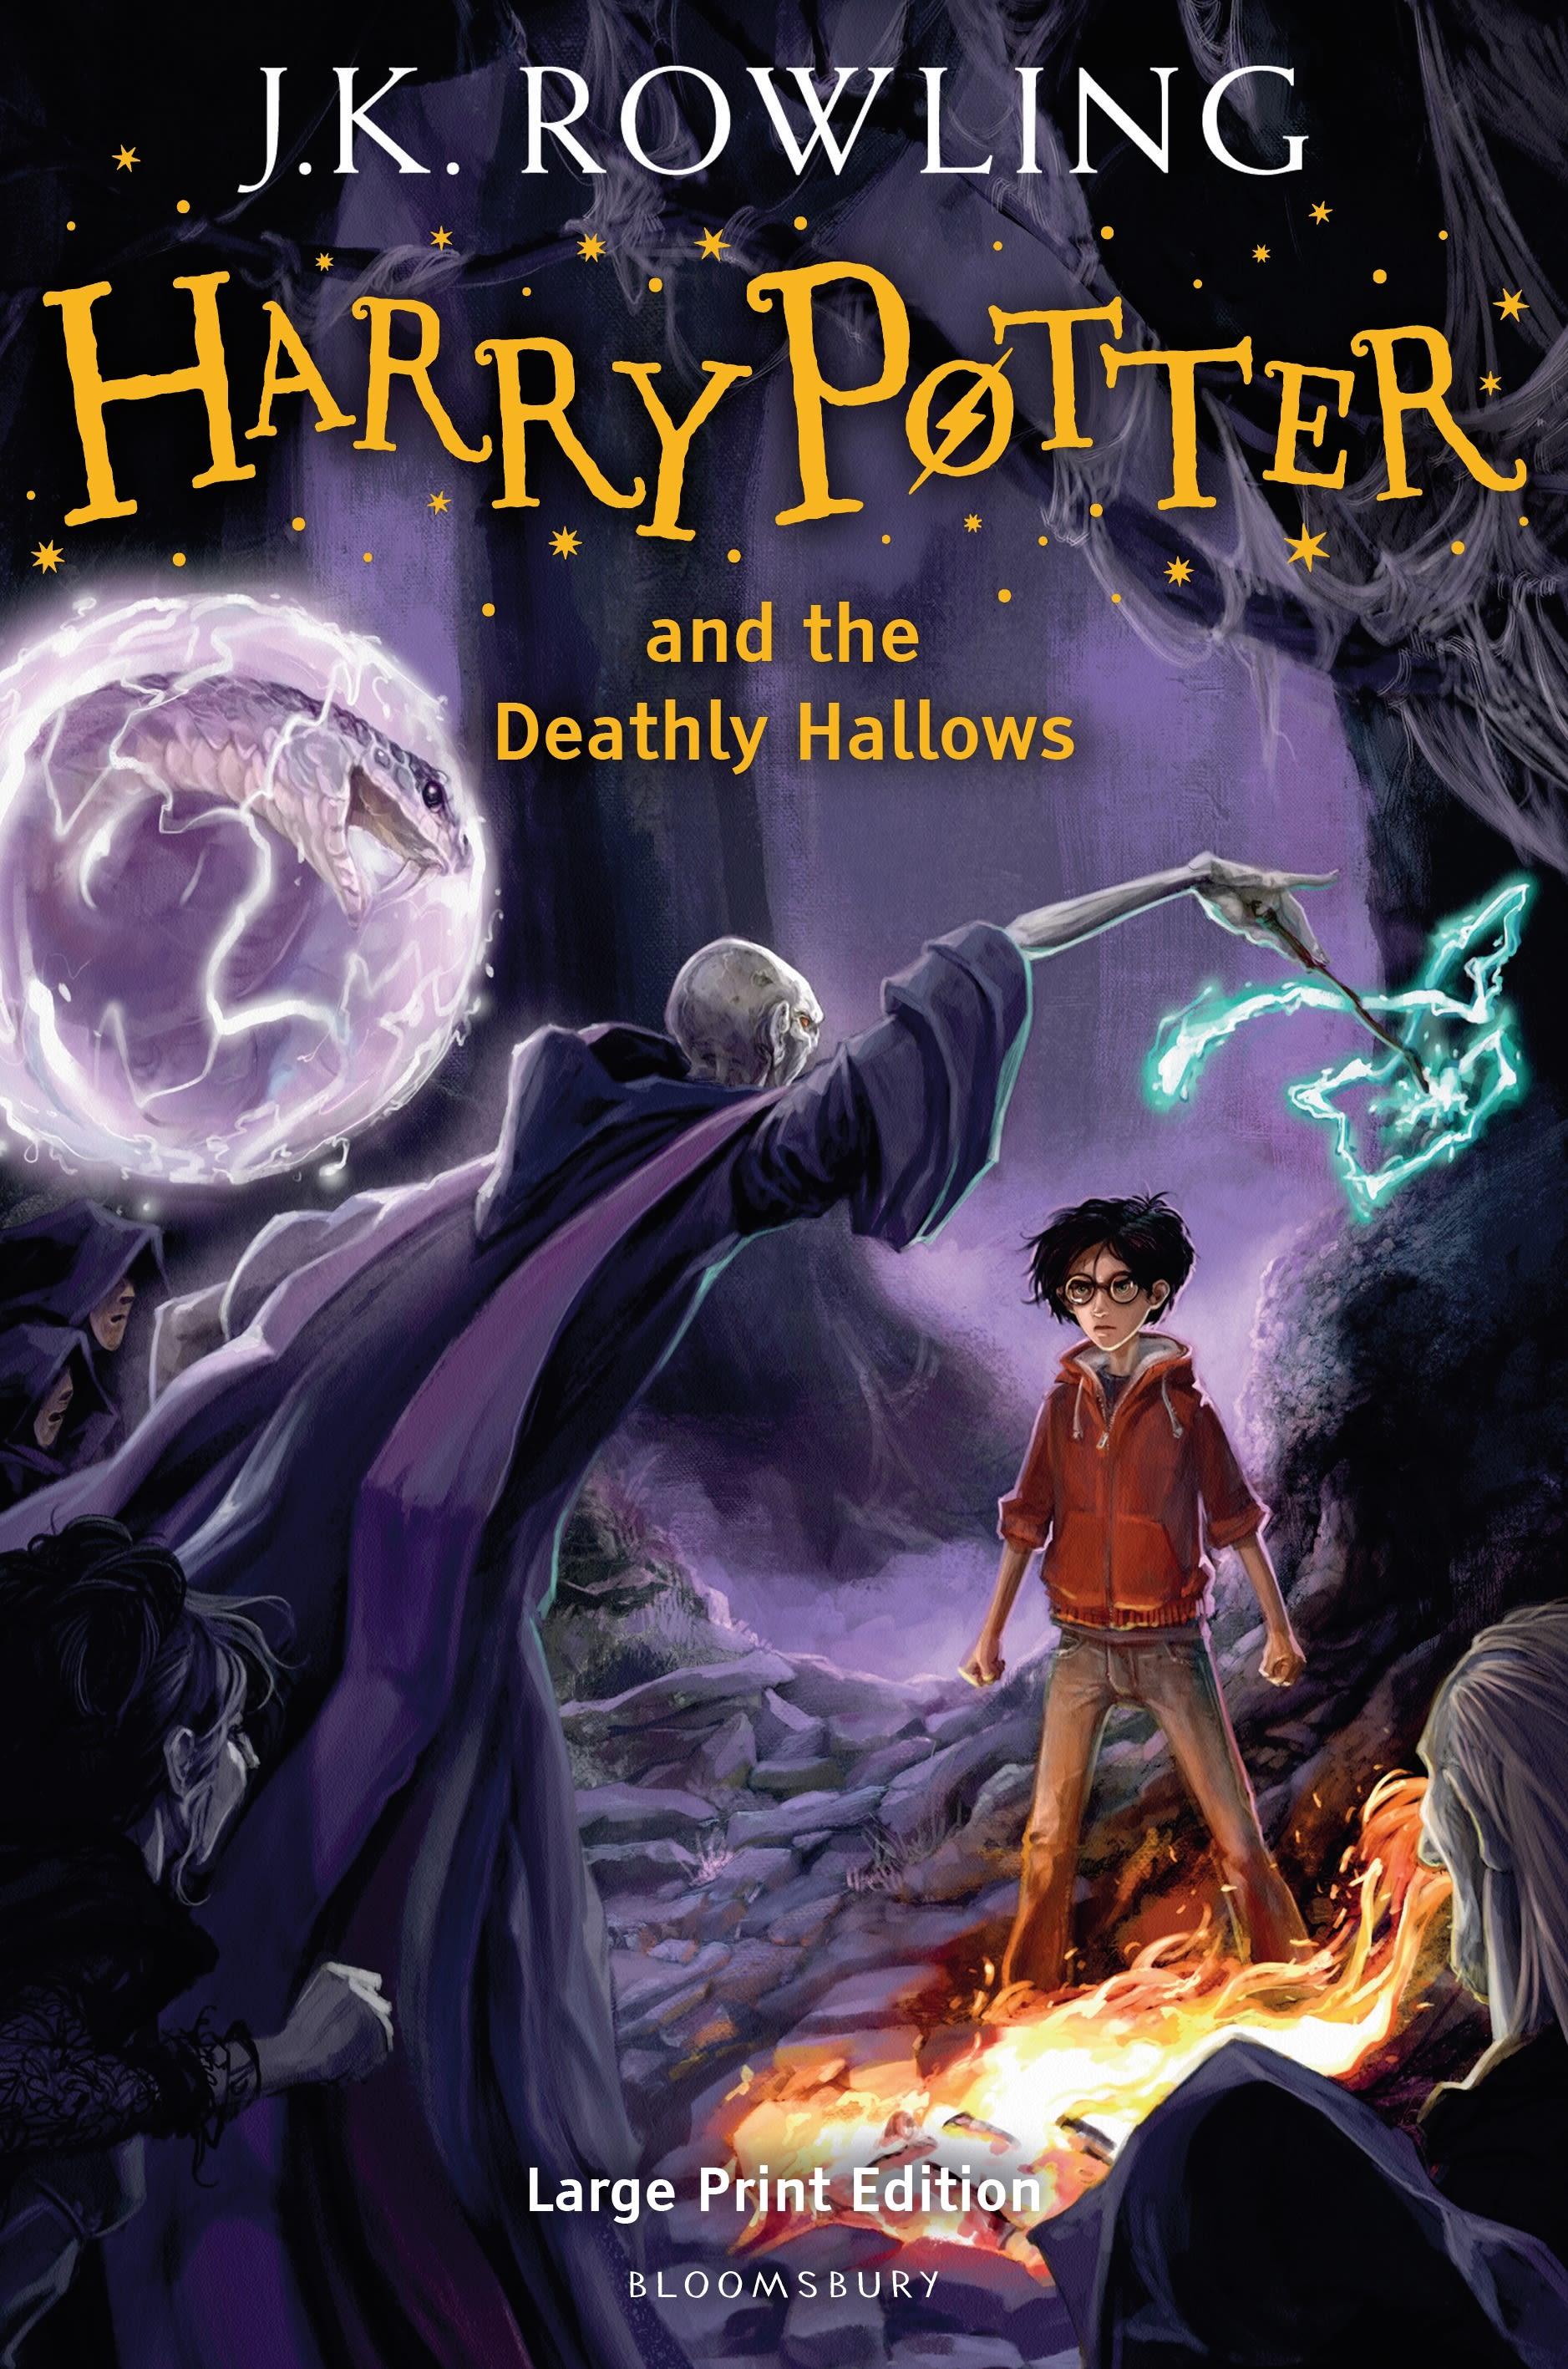 Harry Potter and the Deathly Hallows / Large Print Edition / J. K. Rowling / Buch / 1358 S. / Englisch / 2007 / Bloomsbury Publishing / EAN 9780747591085 - Rowling, J. K.